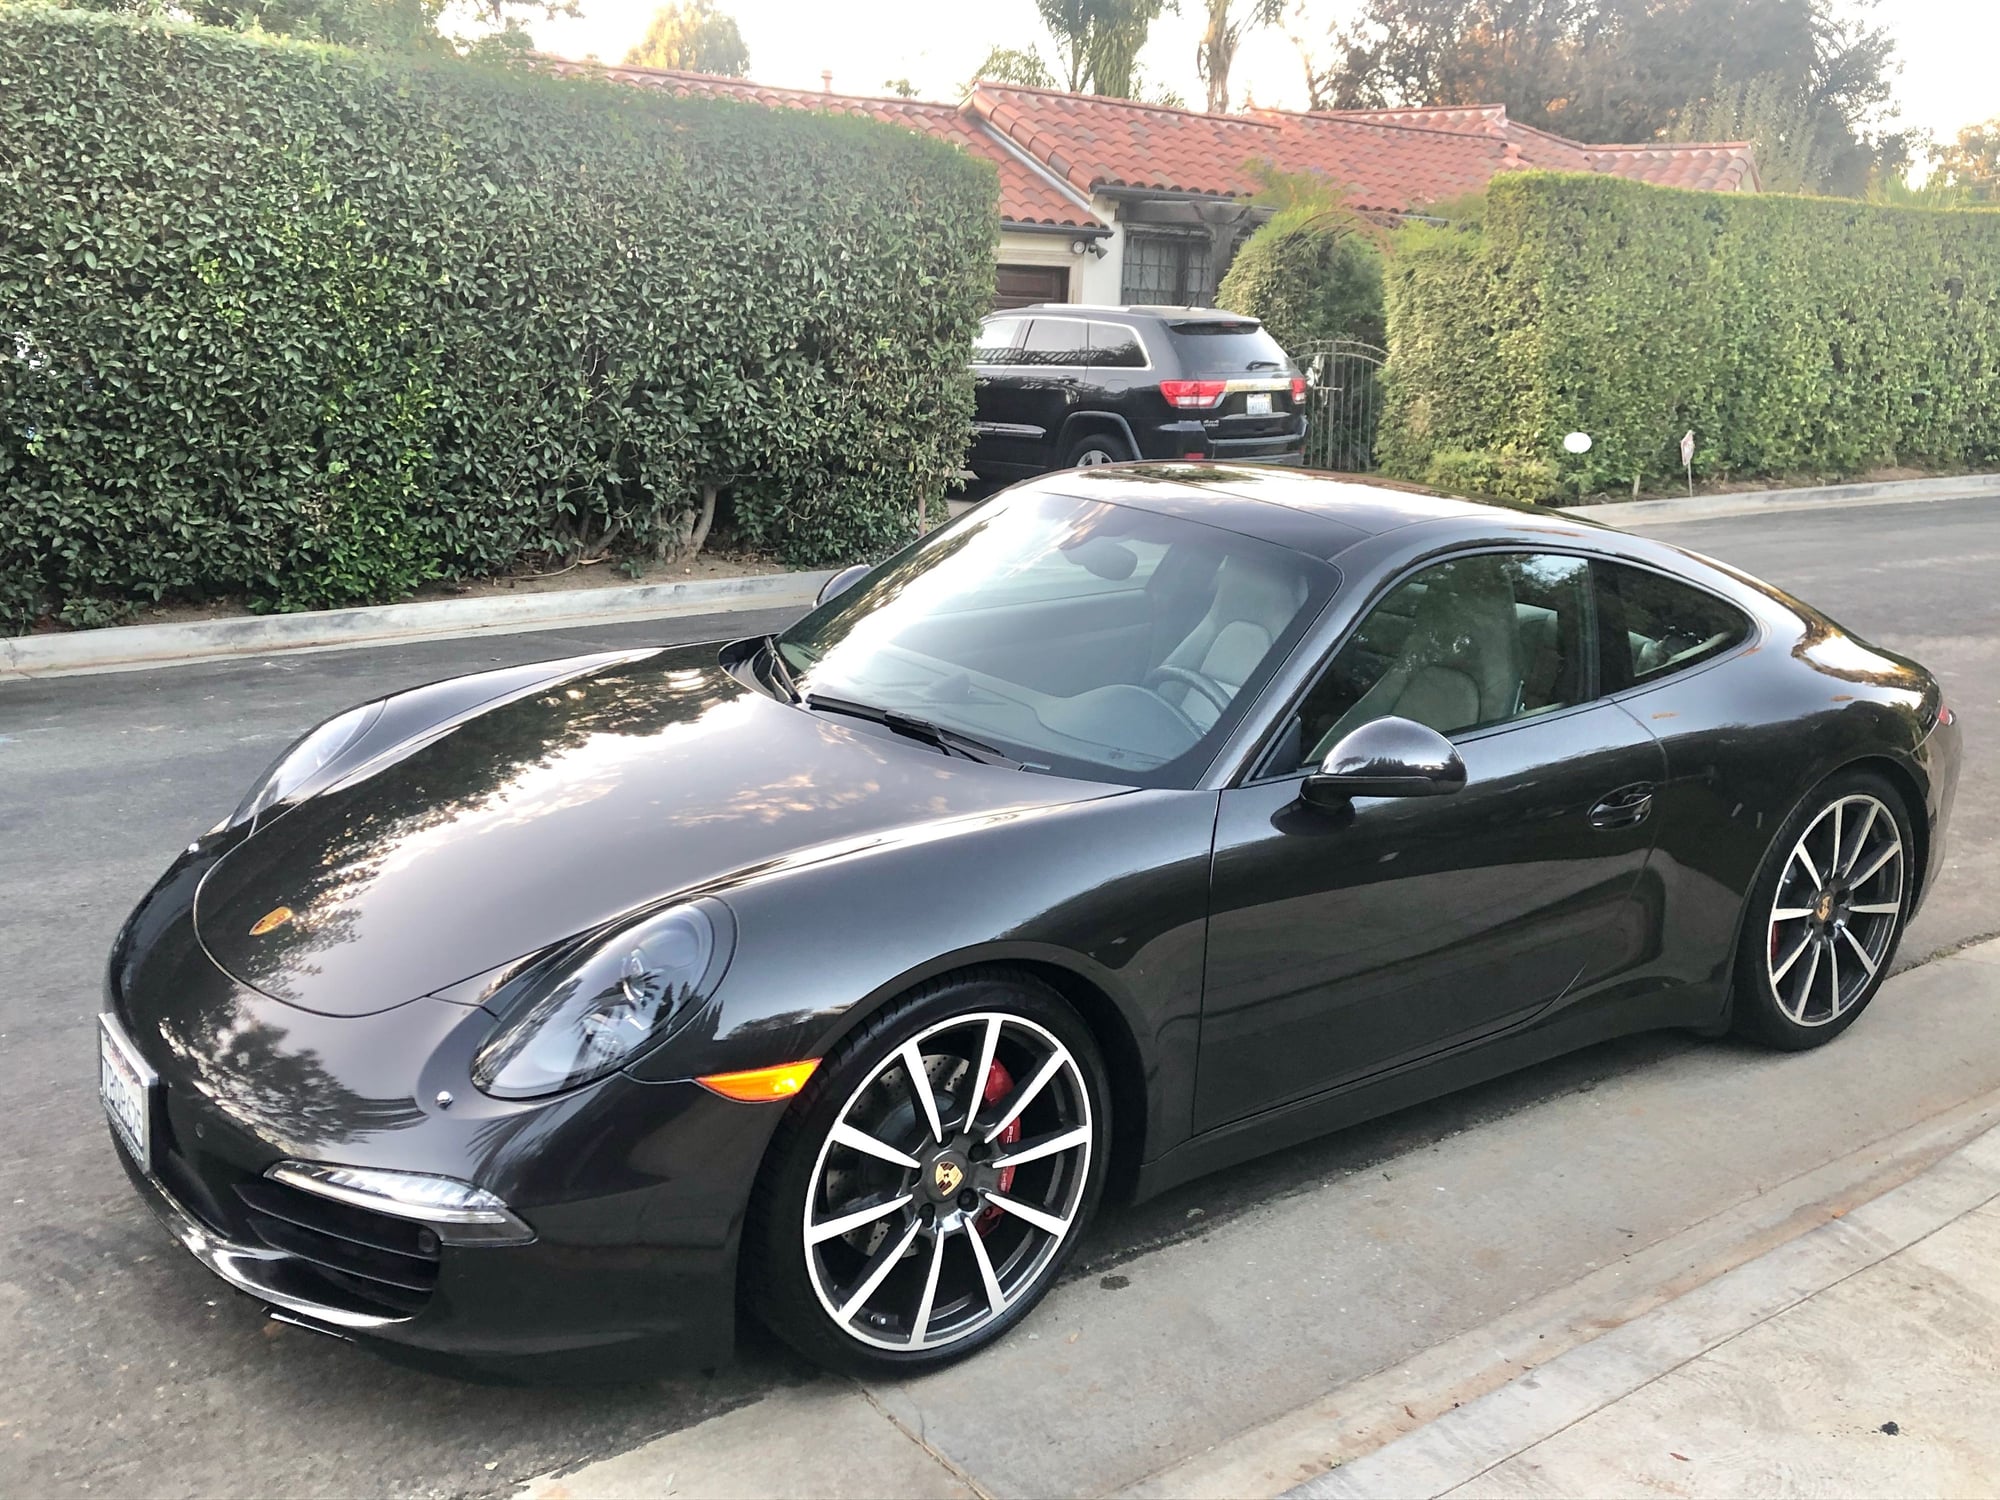 2013 Porsche 911 - Porshe 911S-Like New Barely Driven! 29K miles.  ($77,500) - Used - VIN WP0AB2A91DS122903 - 30,000 Miles - 6 cyl - 2WD - Coupe - Los Angeles, CA 90049, United States